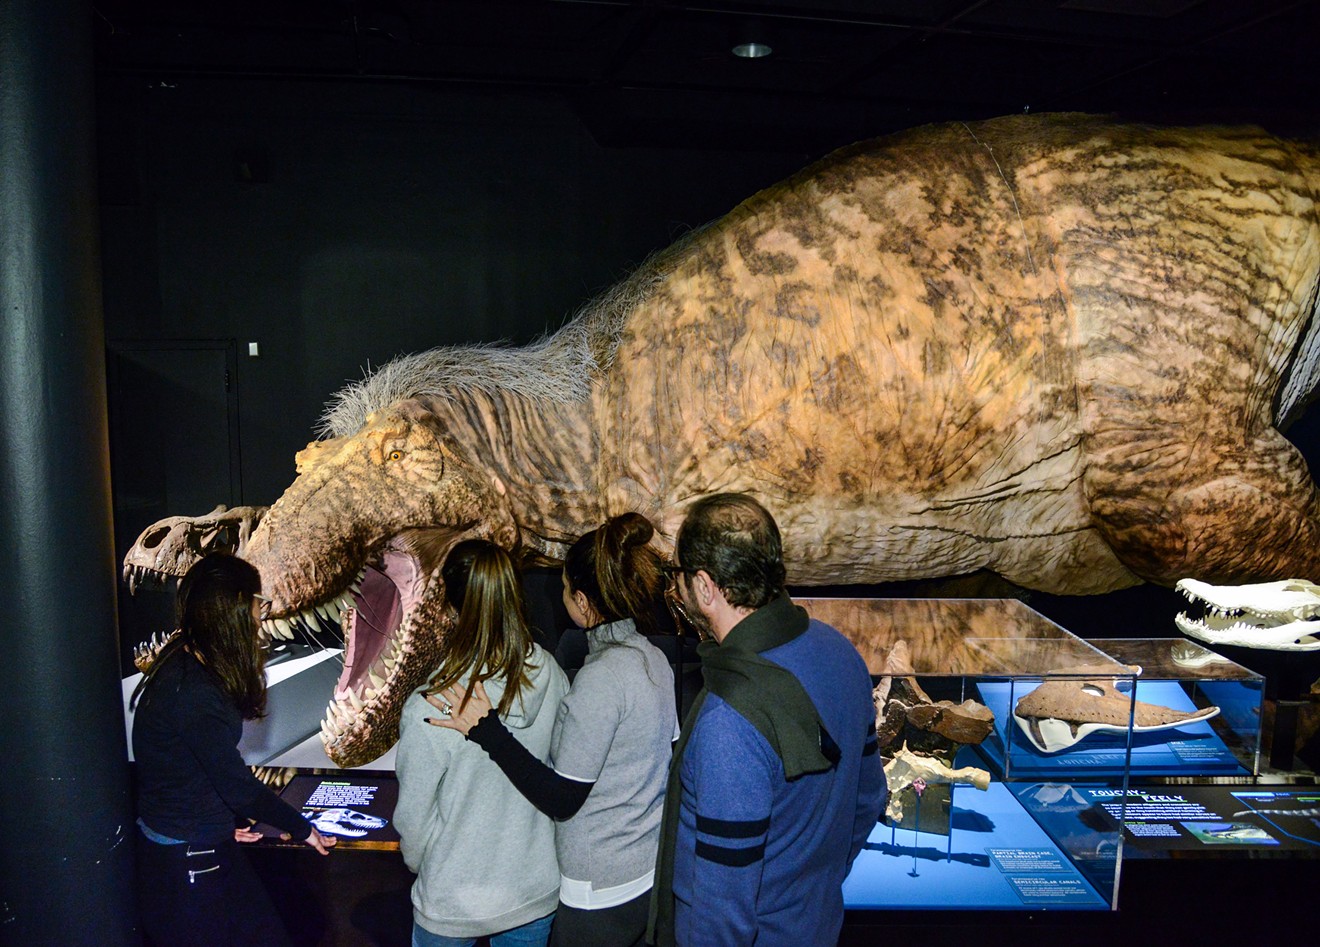 A new exhibition at the Perot, T-rex: The Ultimate Predator, really digs into the past.